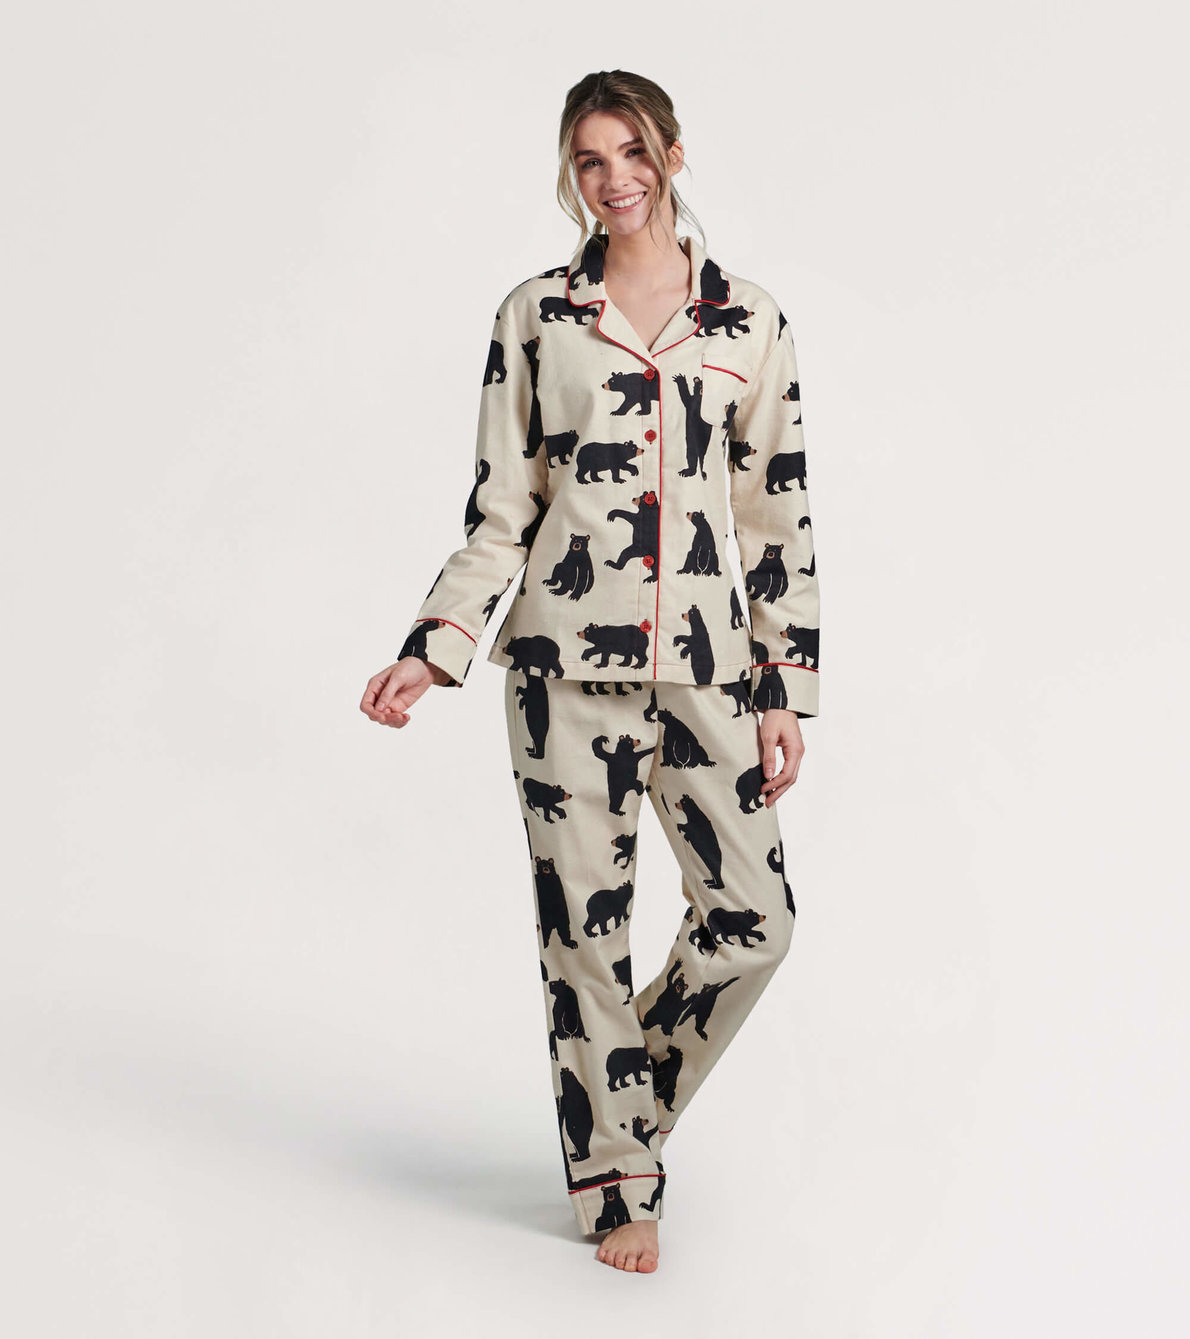 View larger image of Black Bears Women's Flannel Pajama Set